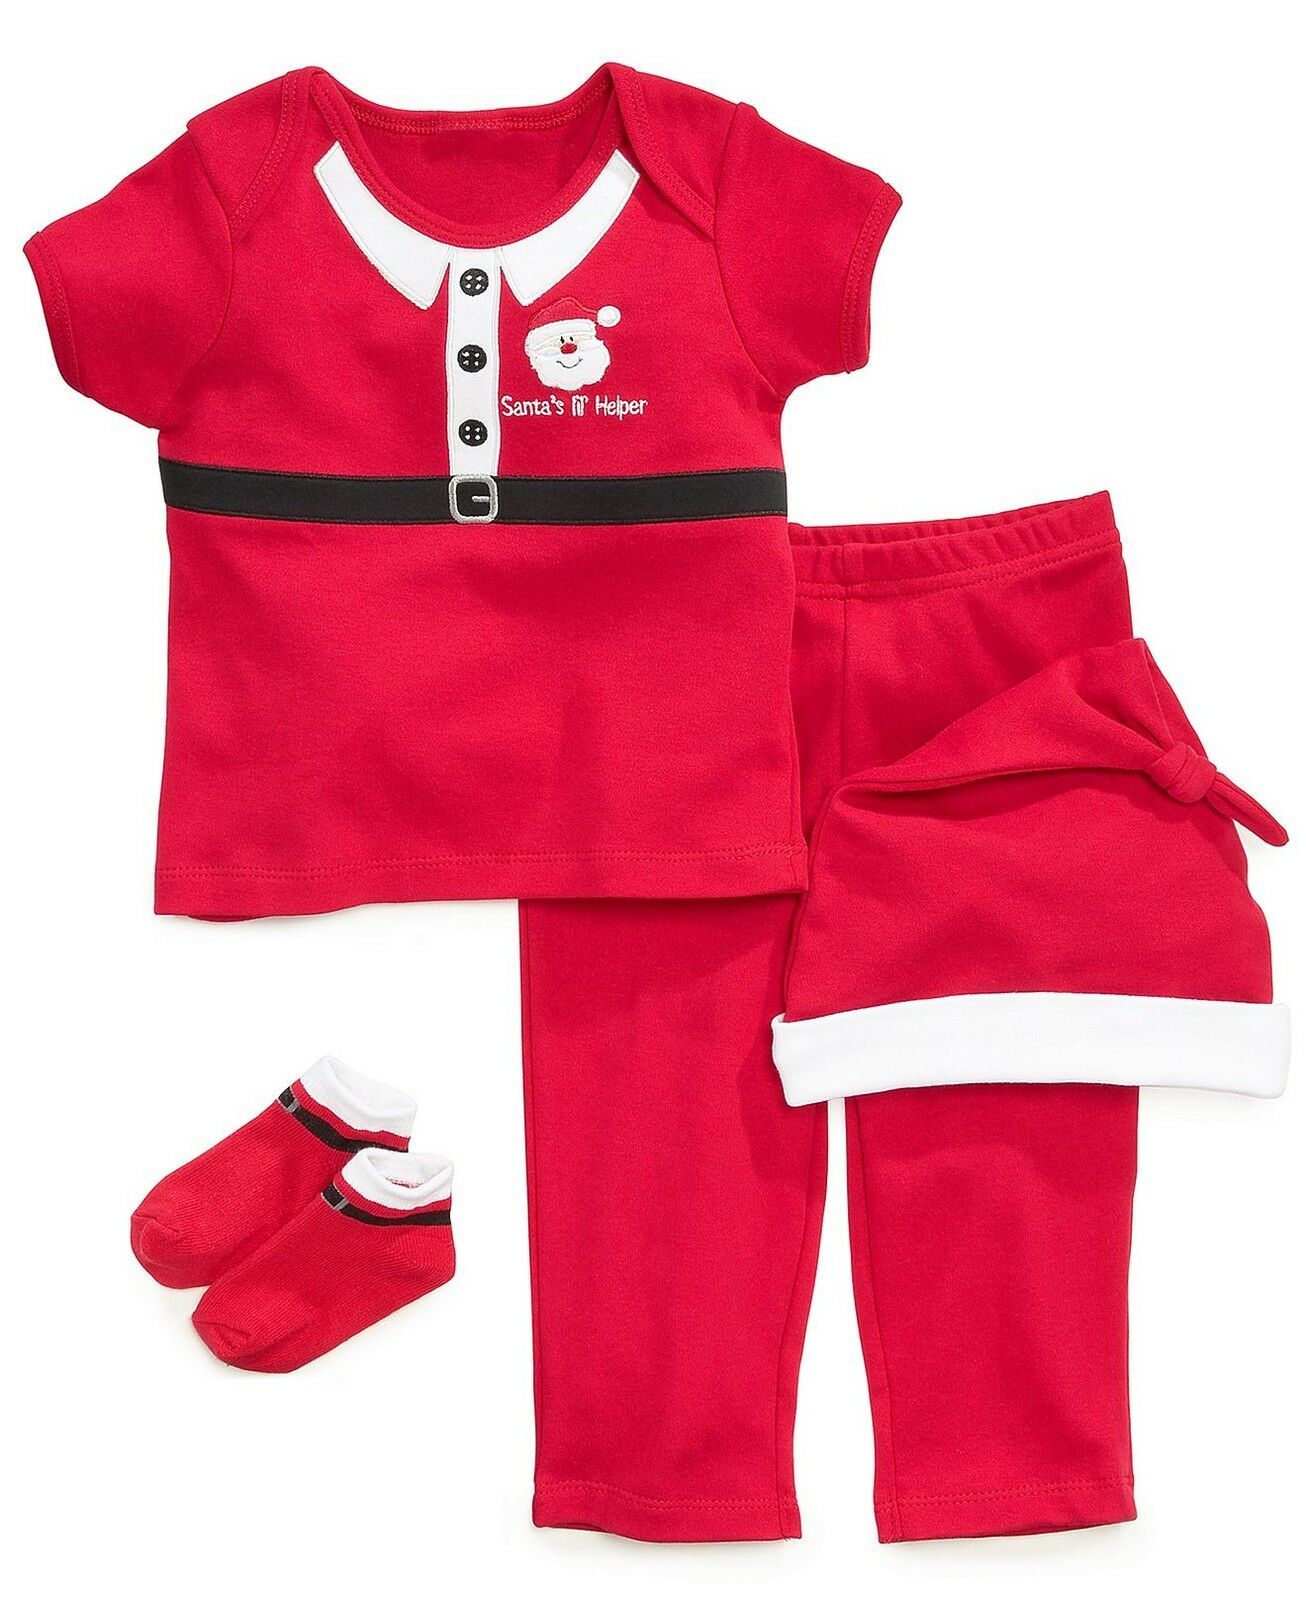 NEW Boys First Impressions 0-6 or 6-12 Months Christmas Santa 4 Piece Set - $8.99